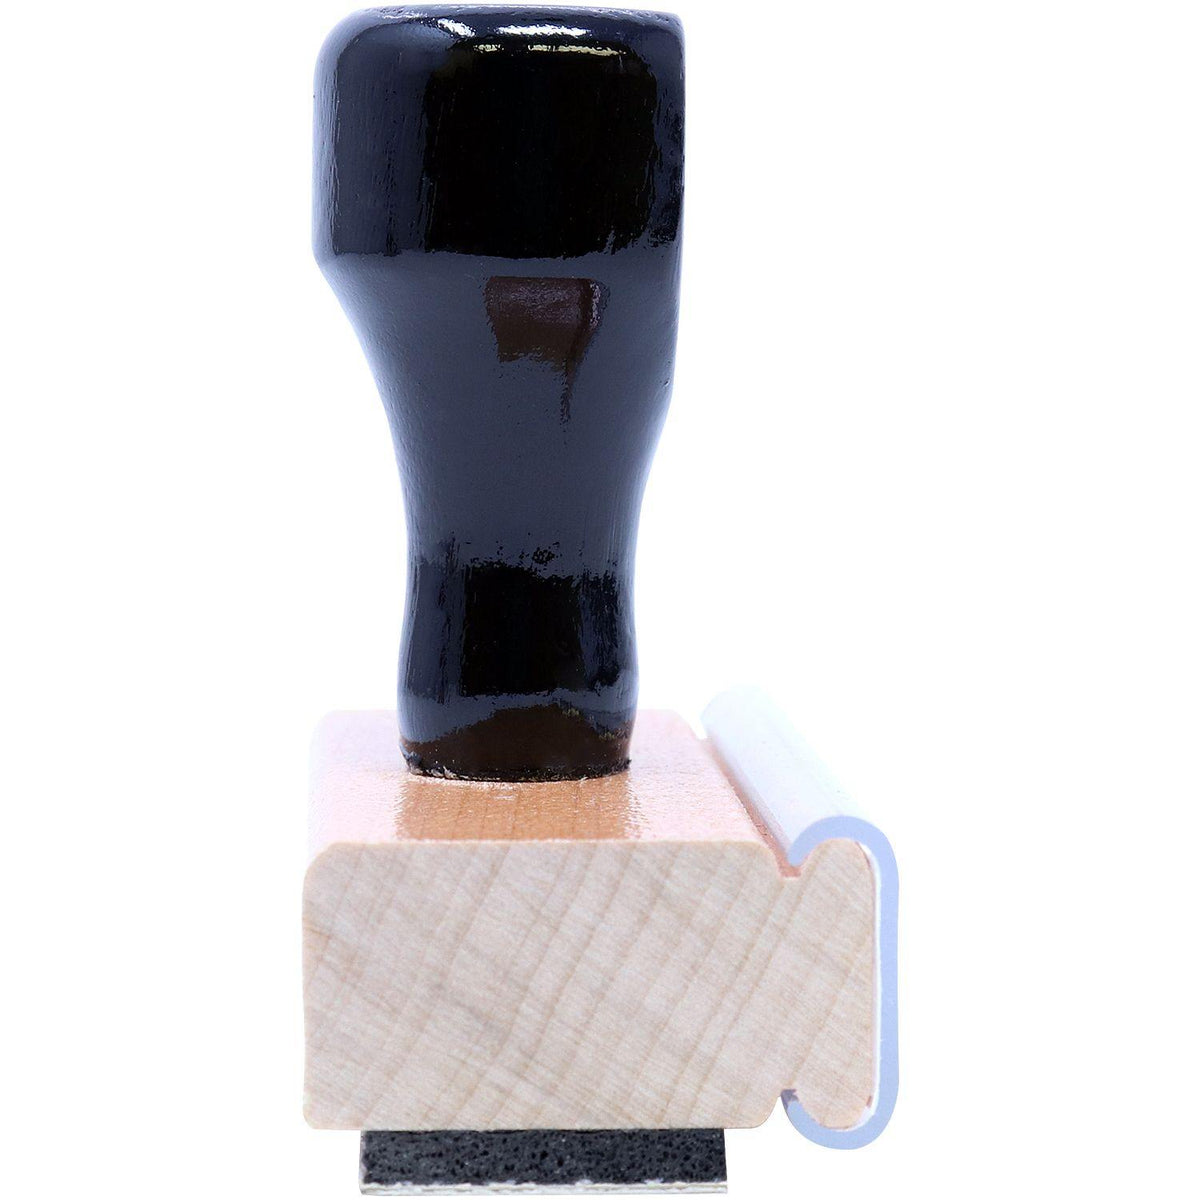 OCR Rubber Stamp - Engineer Seal Stamps - Brand_Acorn, Impression Size_Small, Stamp Type_Regular Stamp, Type of Use_Office, Type of Use_Professional